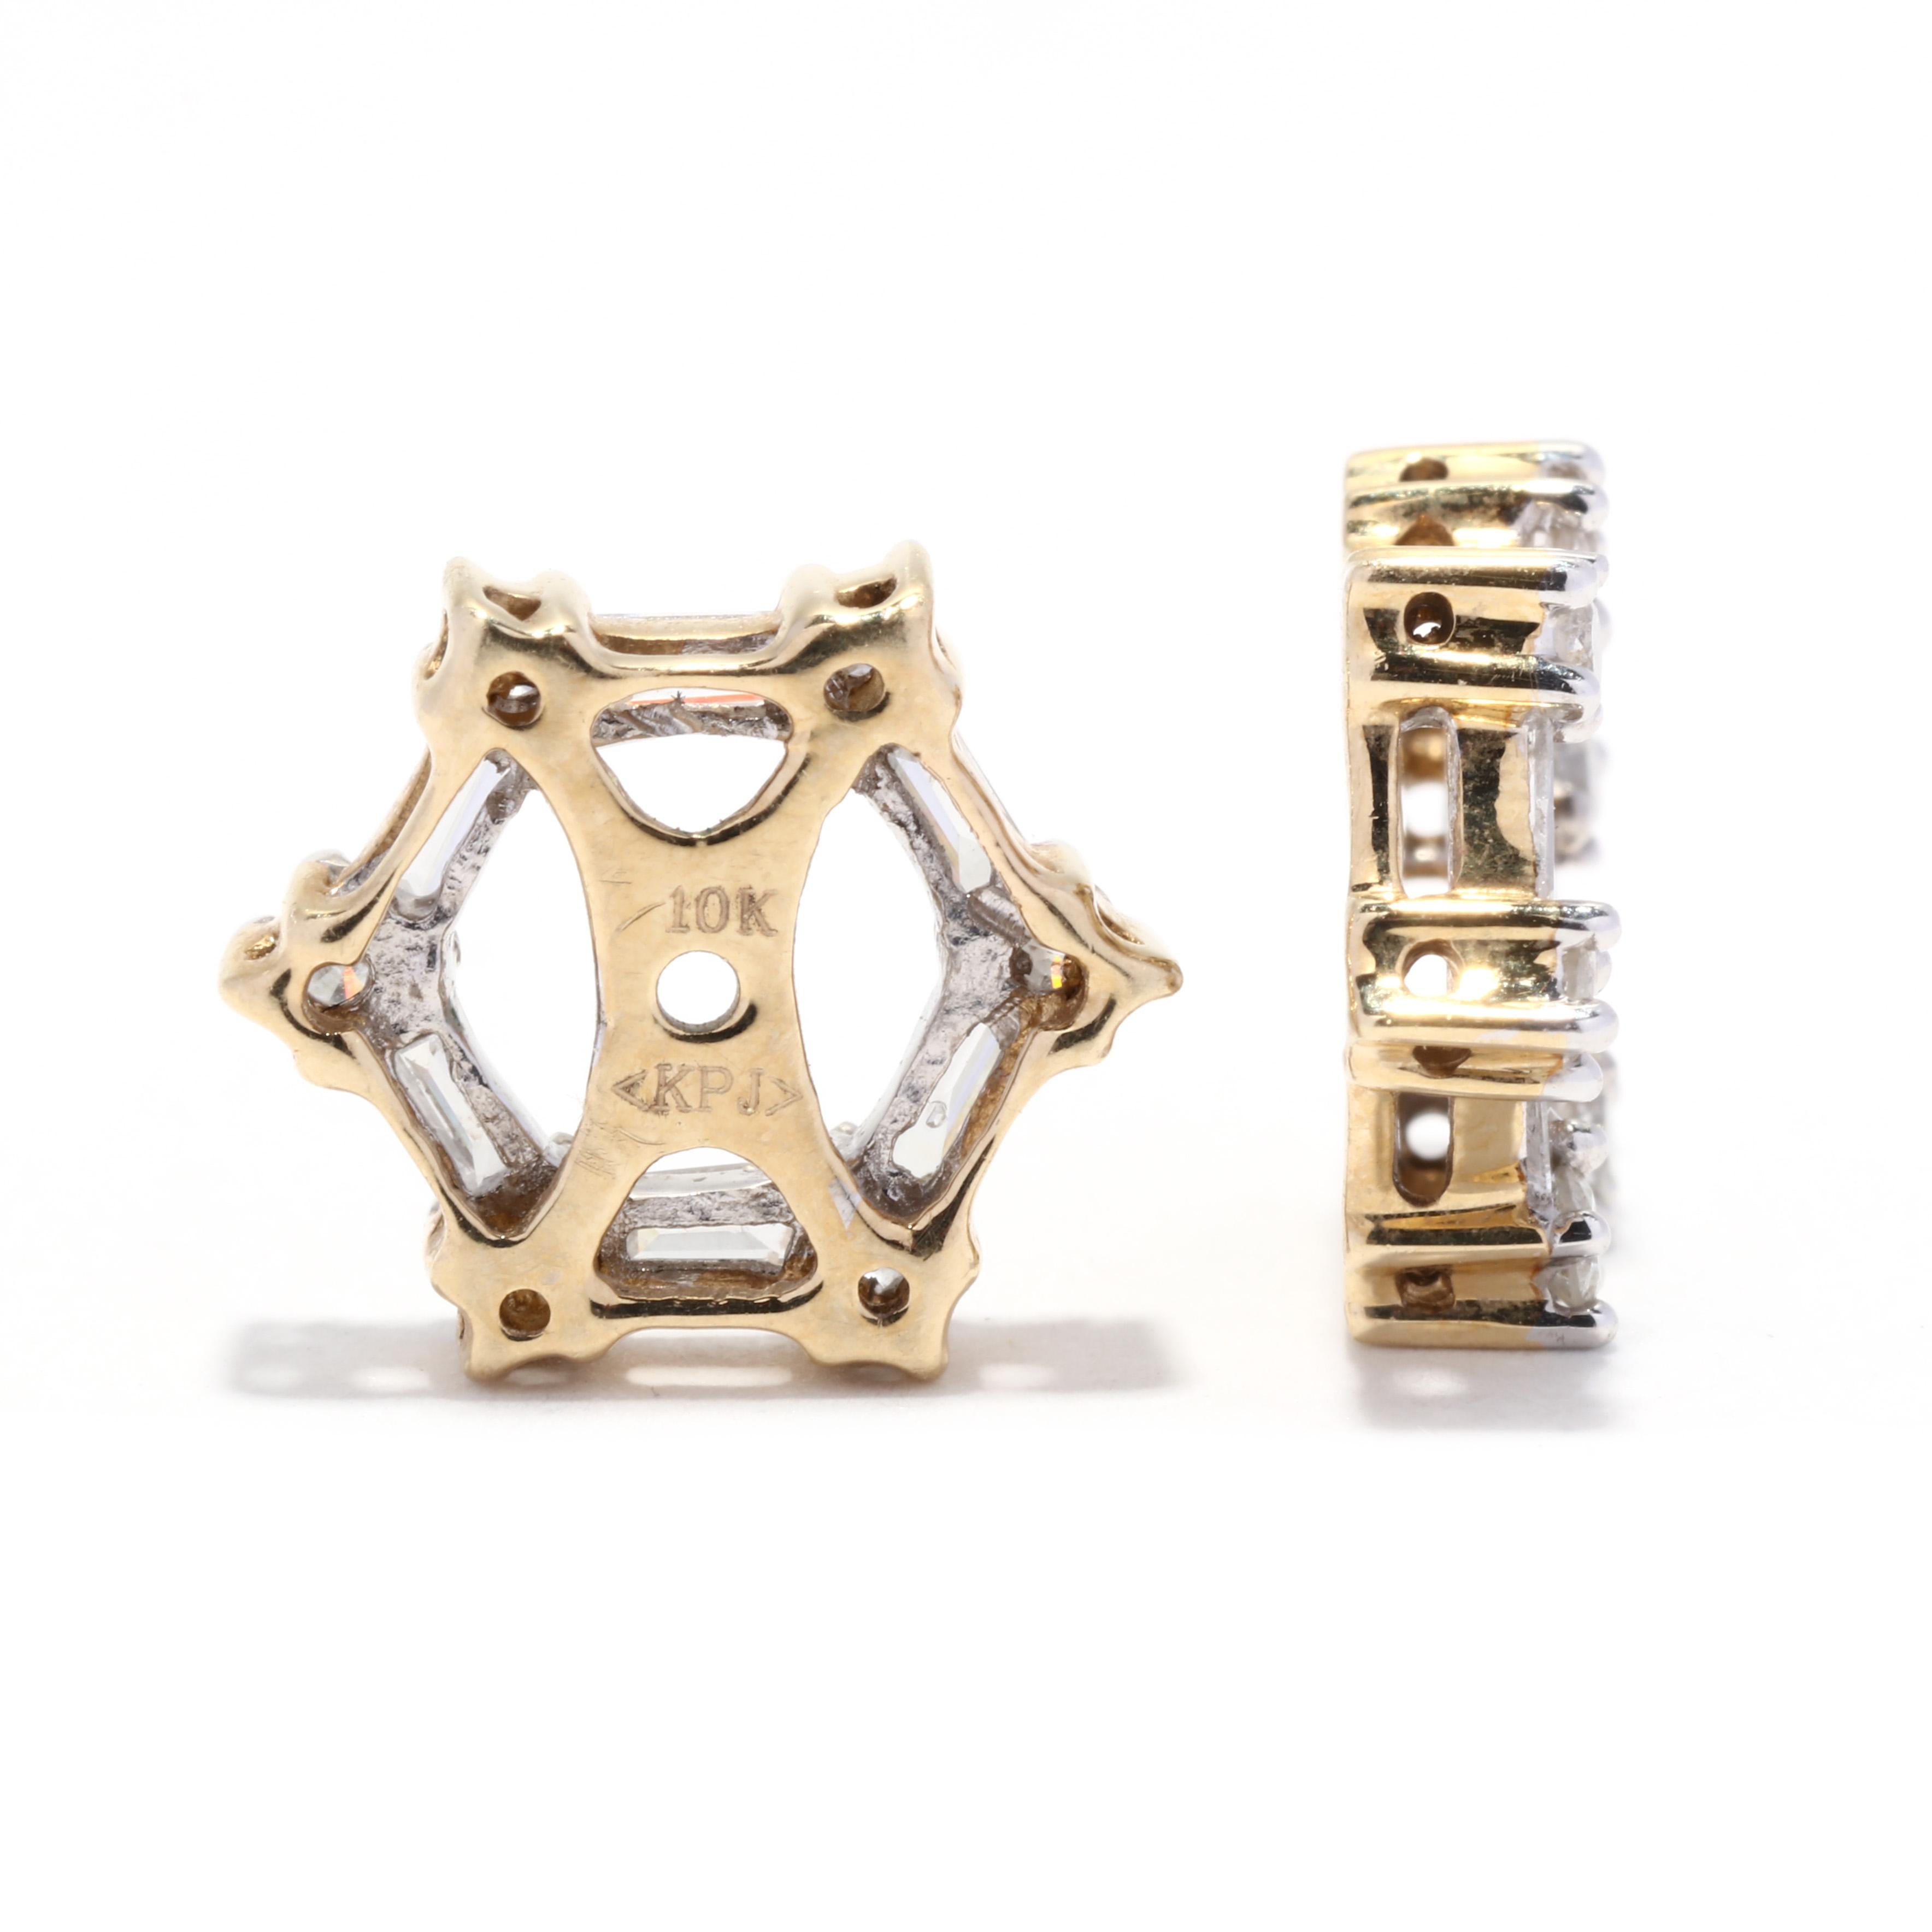 A pair of vintage 10 karat yellow gold diamond earring jackets. These simple earring jackets feature a hexagonal design with alternating baguette cut diamonds weighing approximately .50 total carats and round brilliant cut diamonds weighing